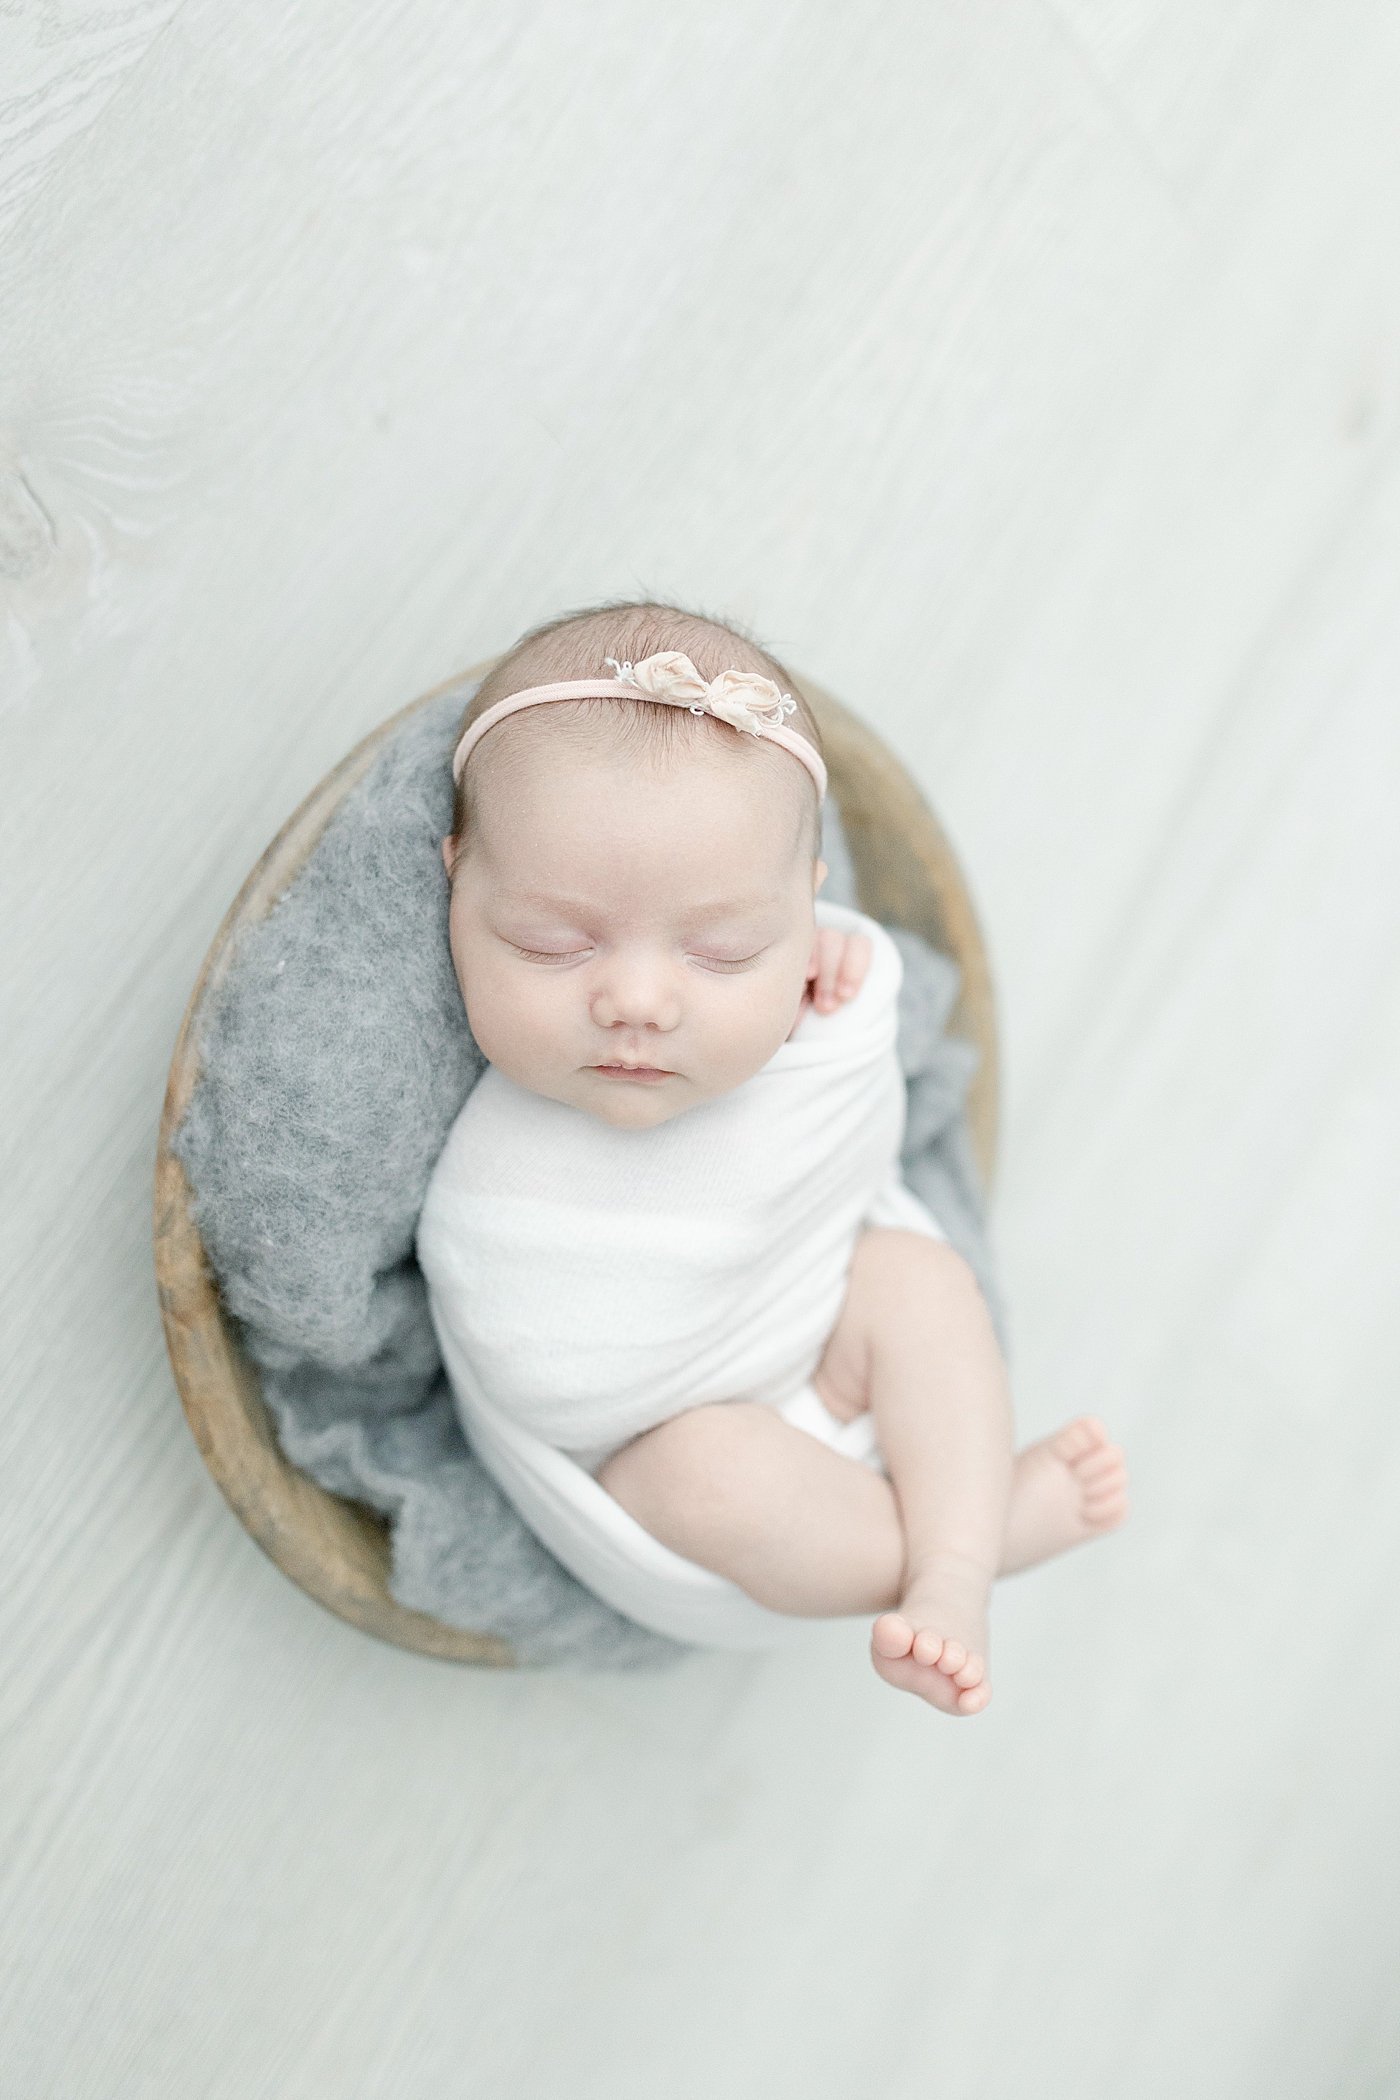 Detail photo of sleeping baby in white swaddle with rose headband | Photo by Little Sunshine Photography 